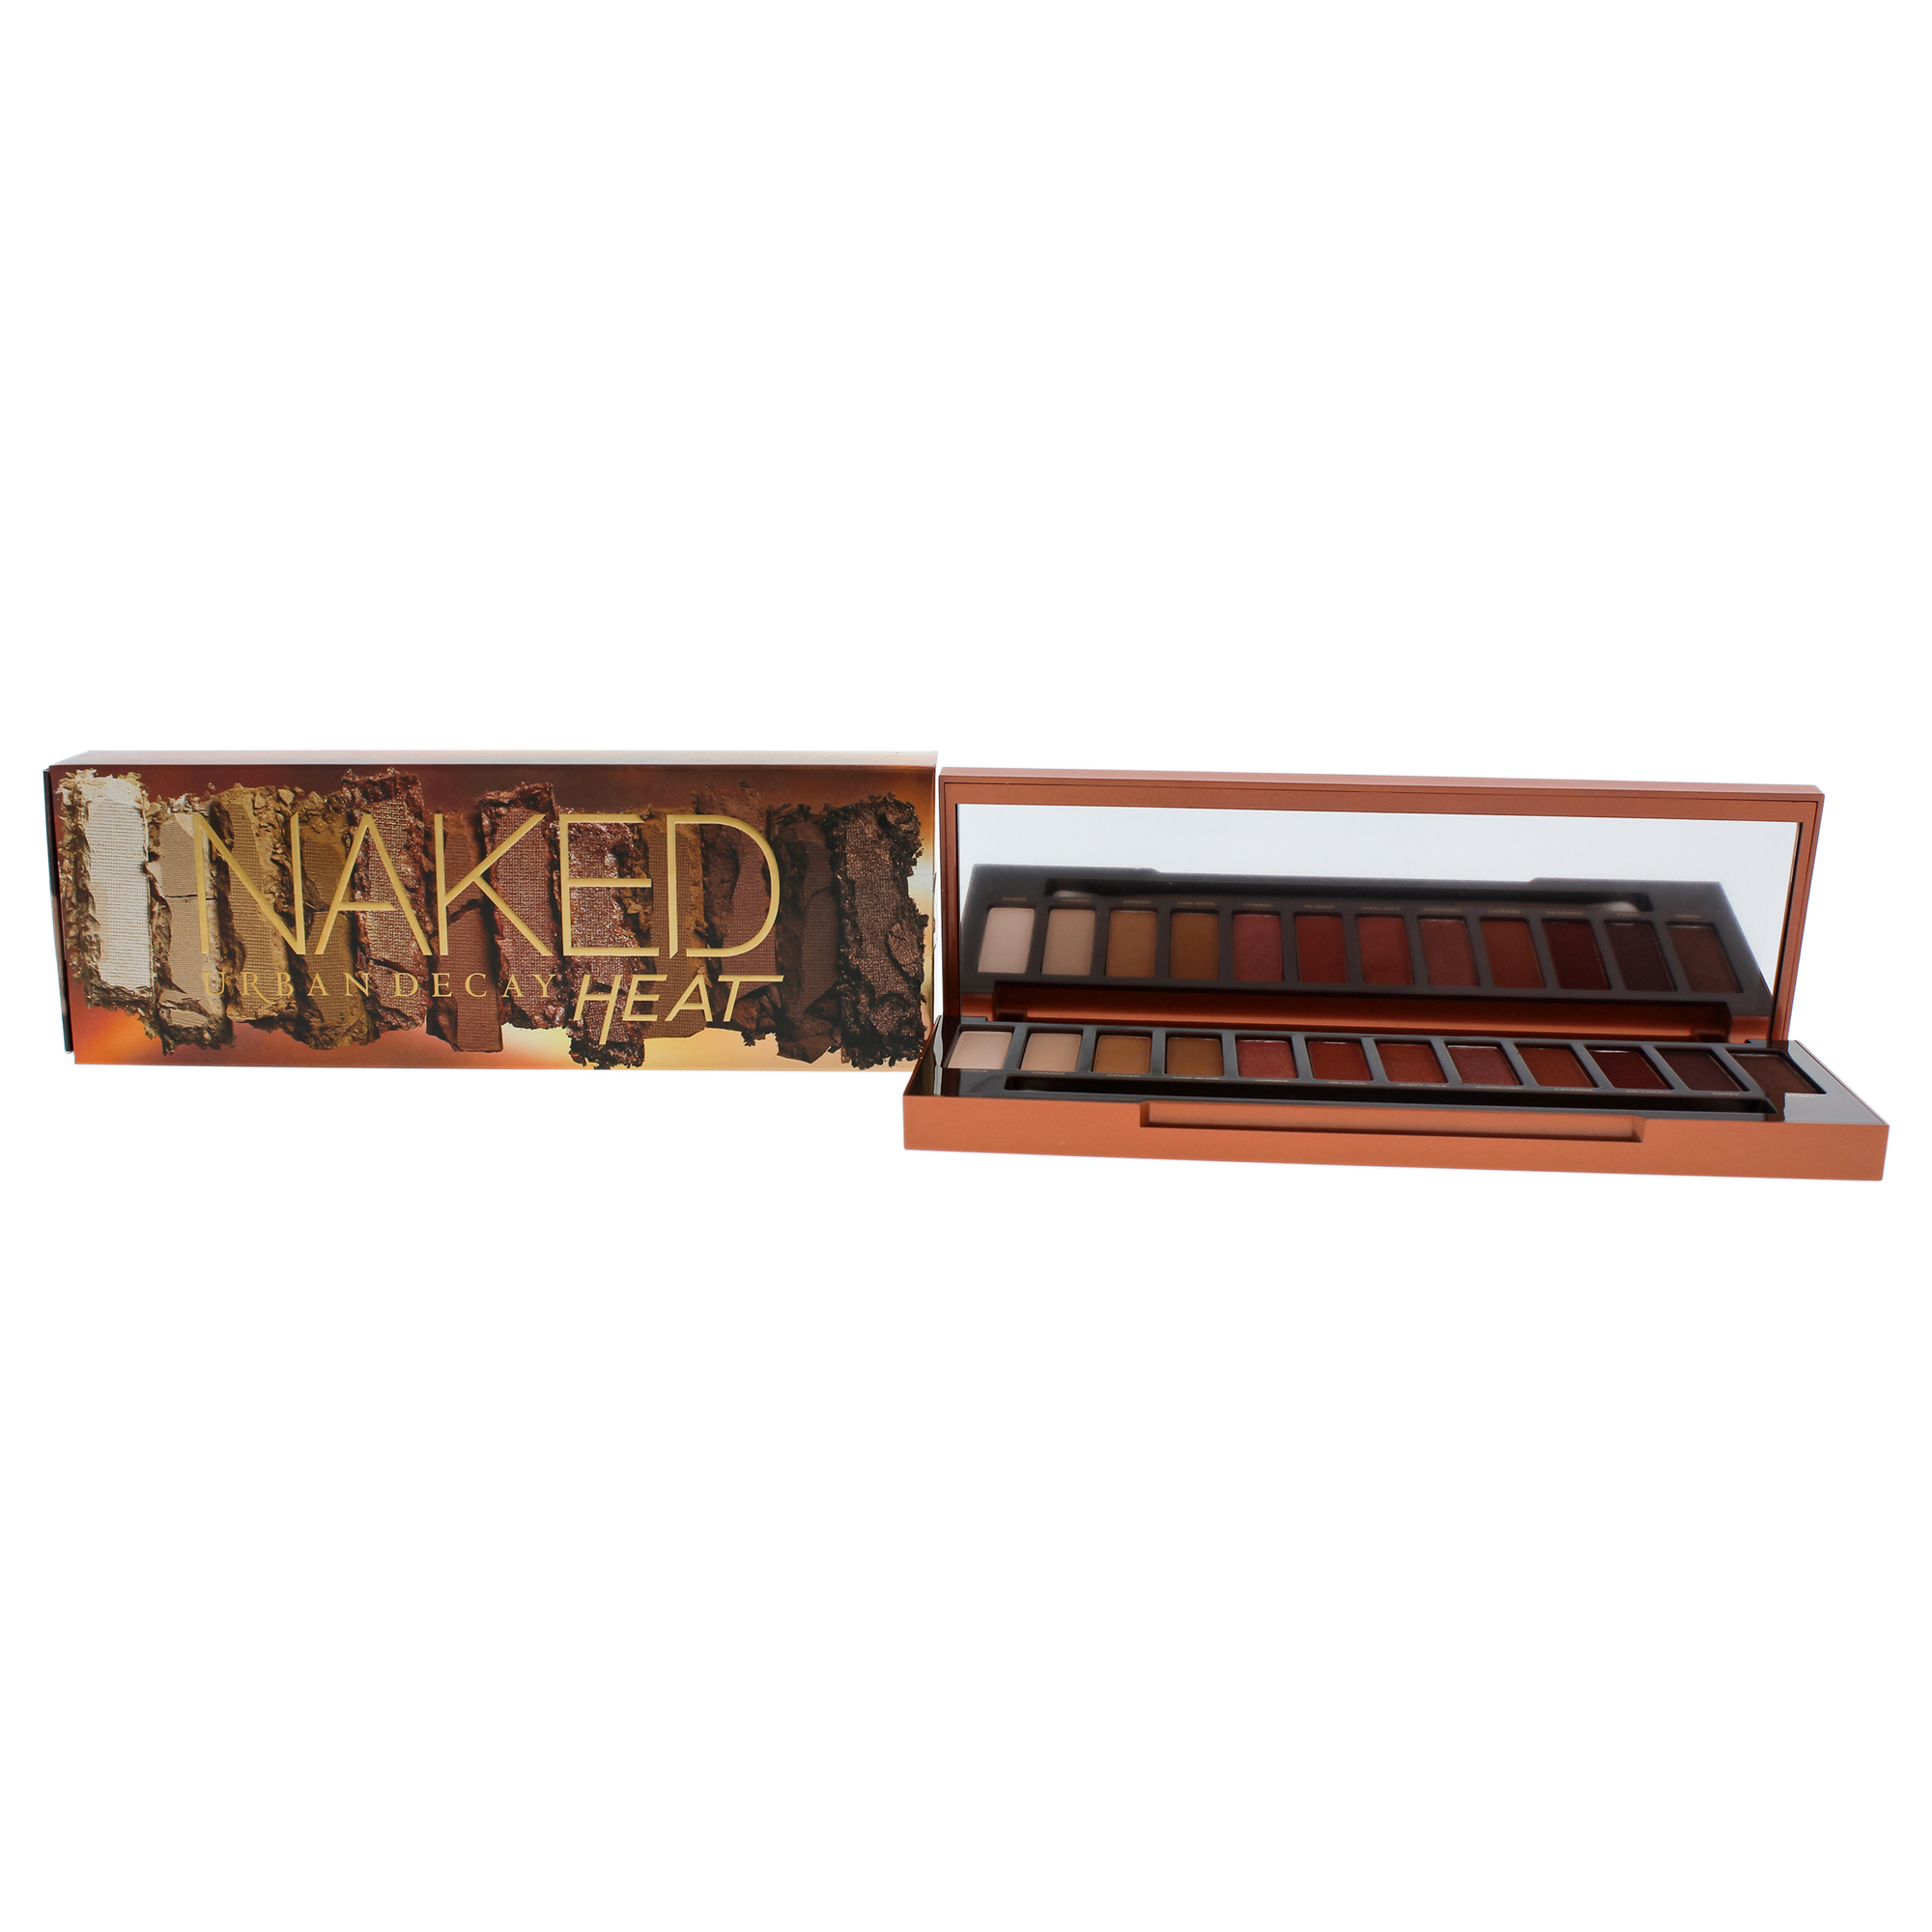 Naked Heat Eyeshadow Palette by Urban Decay for Women - 0.6 oz Eye Shadow - image 1 of 8